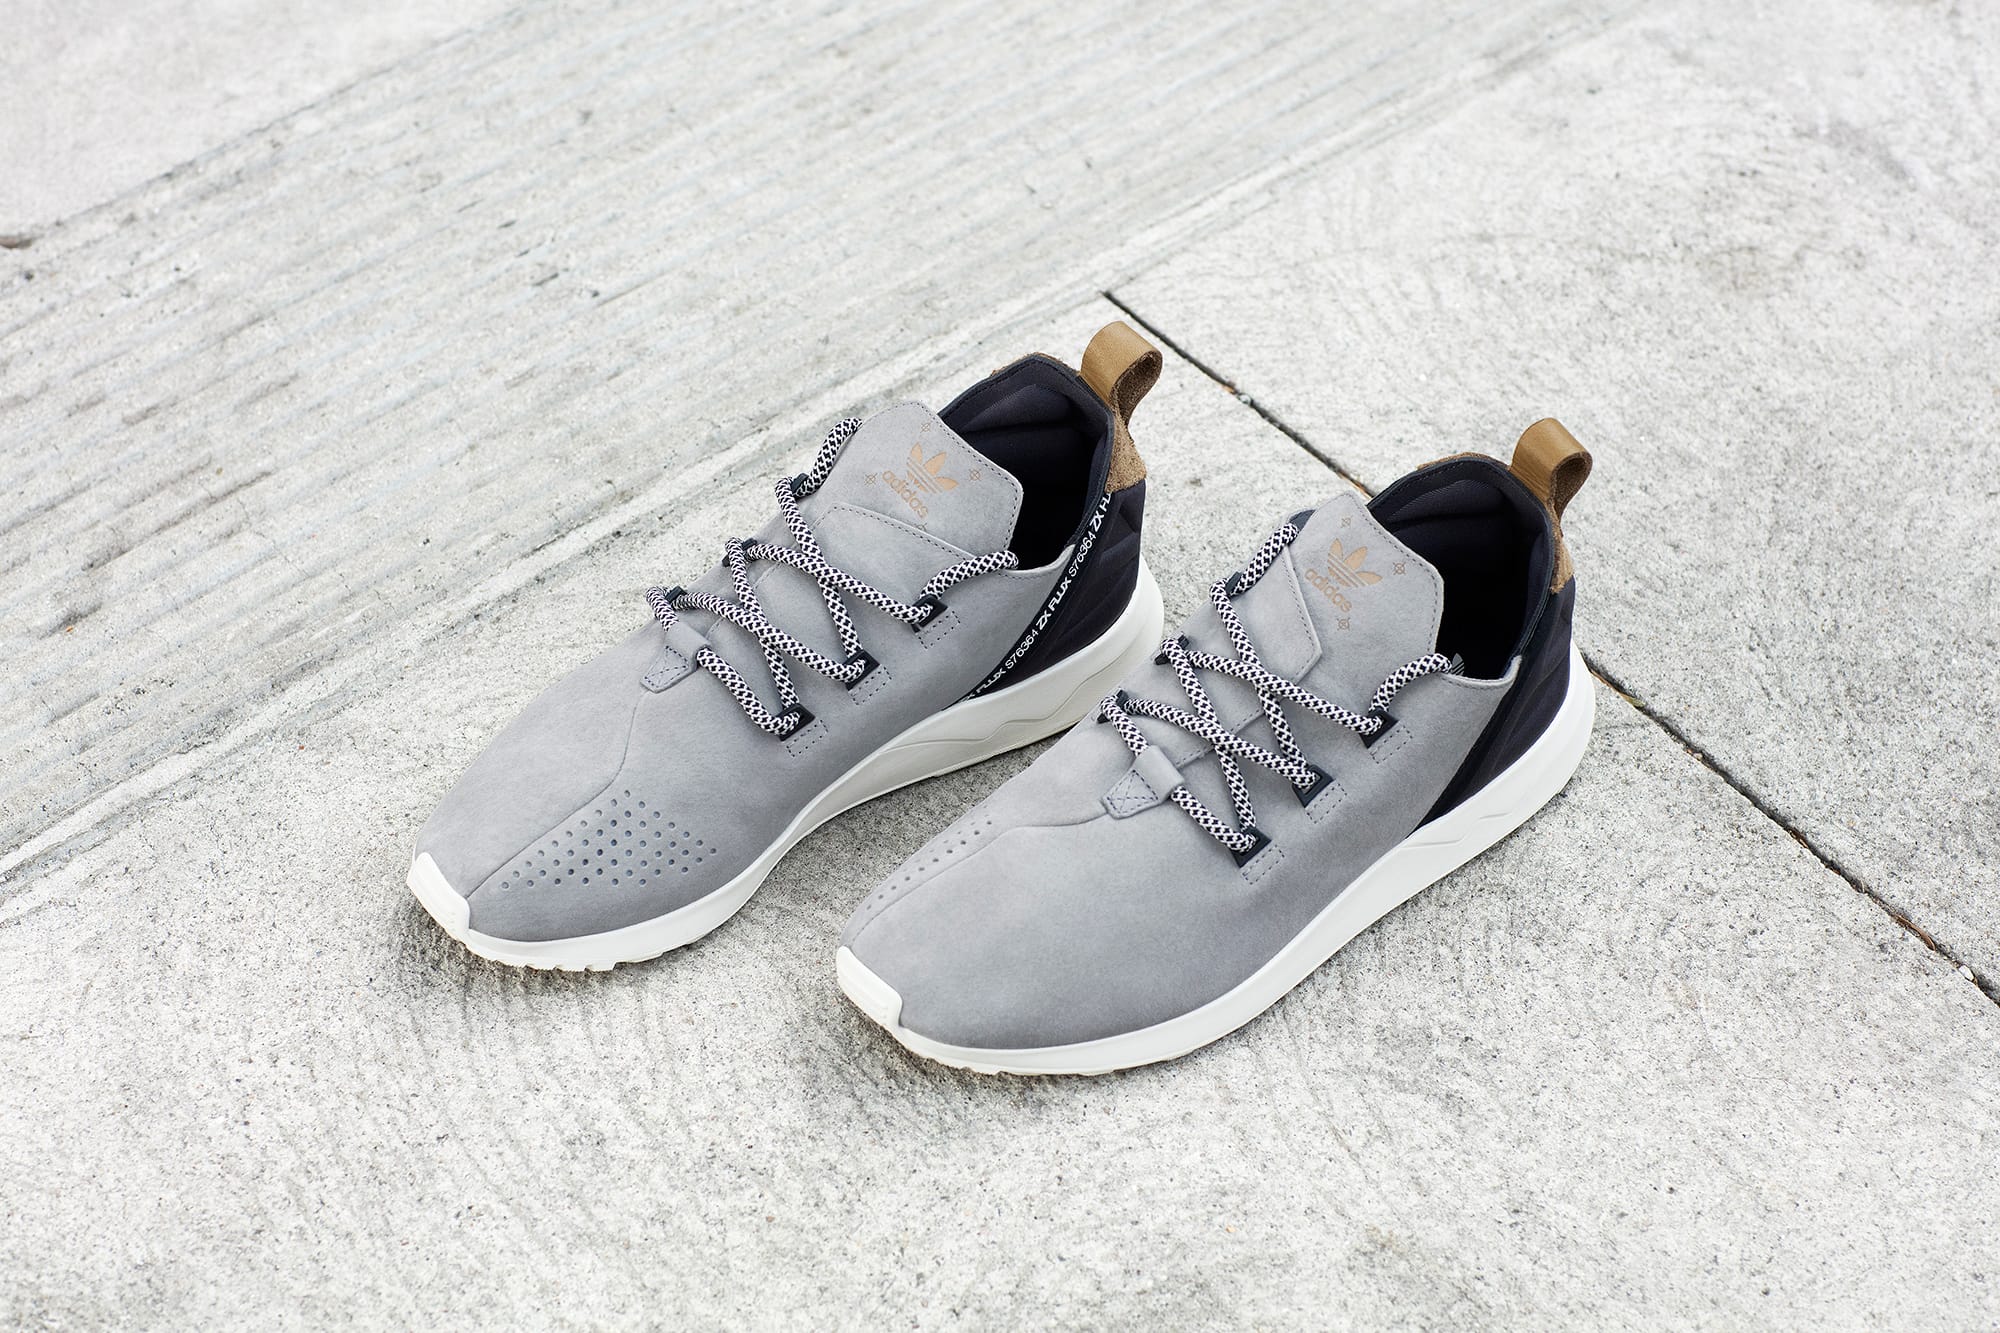 Adidas Zx Flux Adv X Best Sale, UP TO 63% OFF